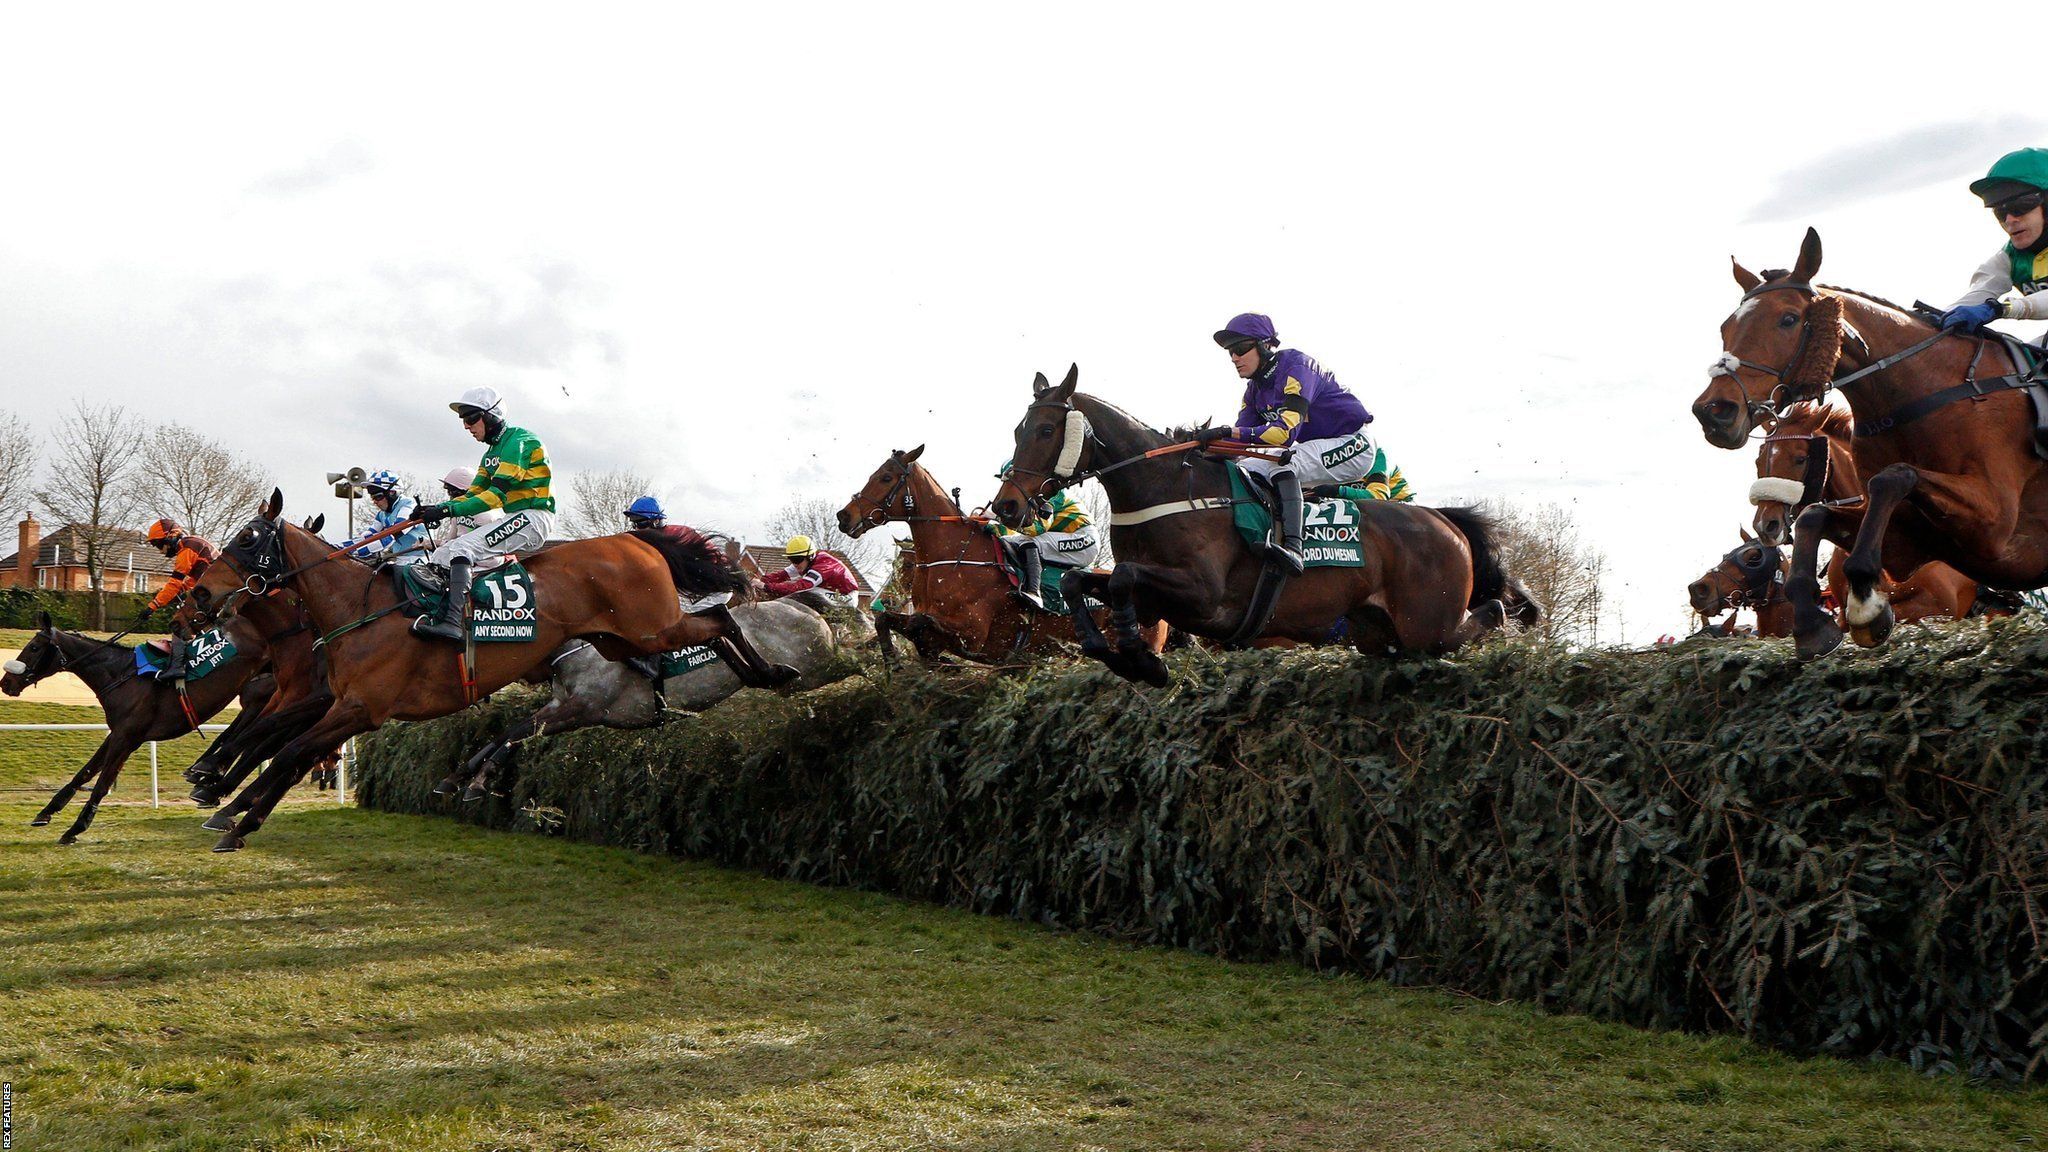 Runners in the Grand National